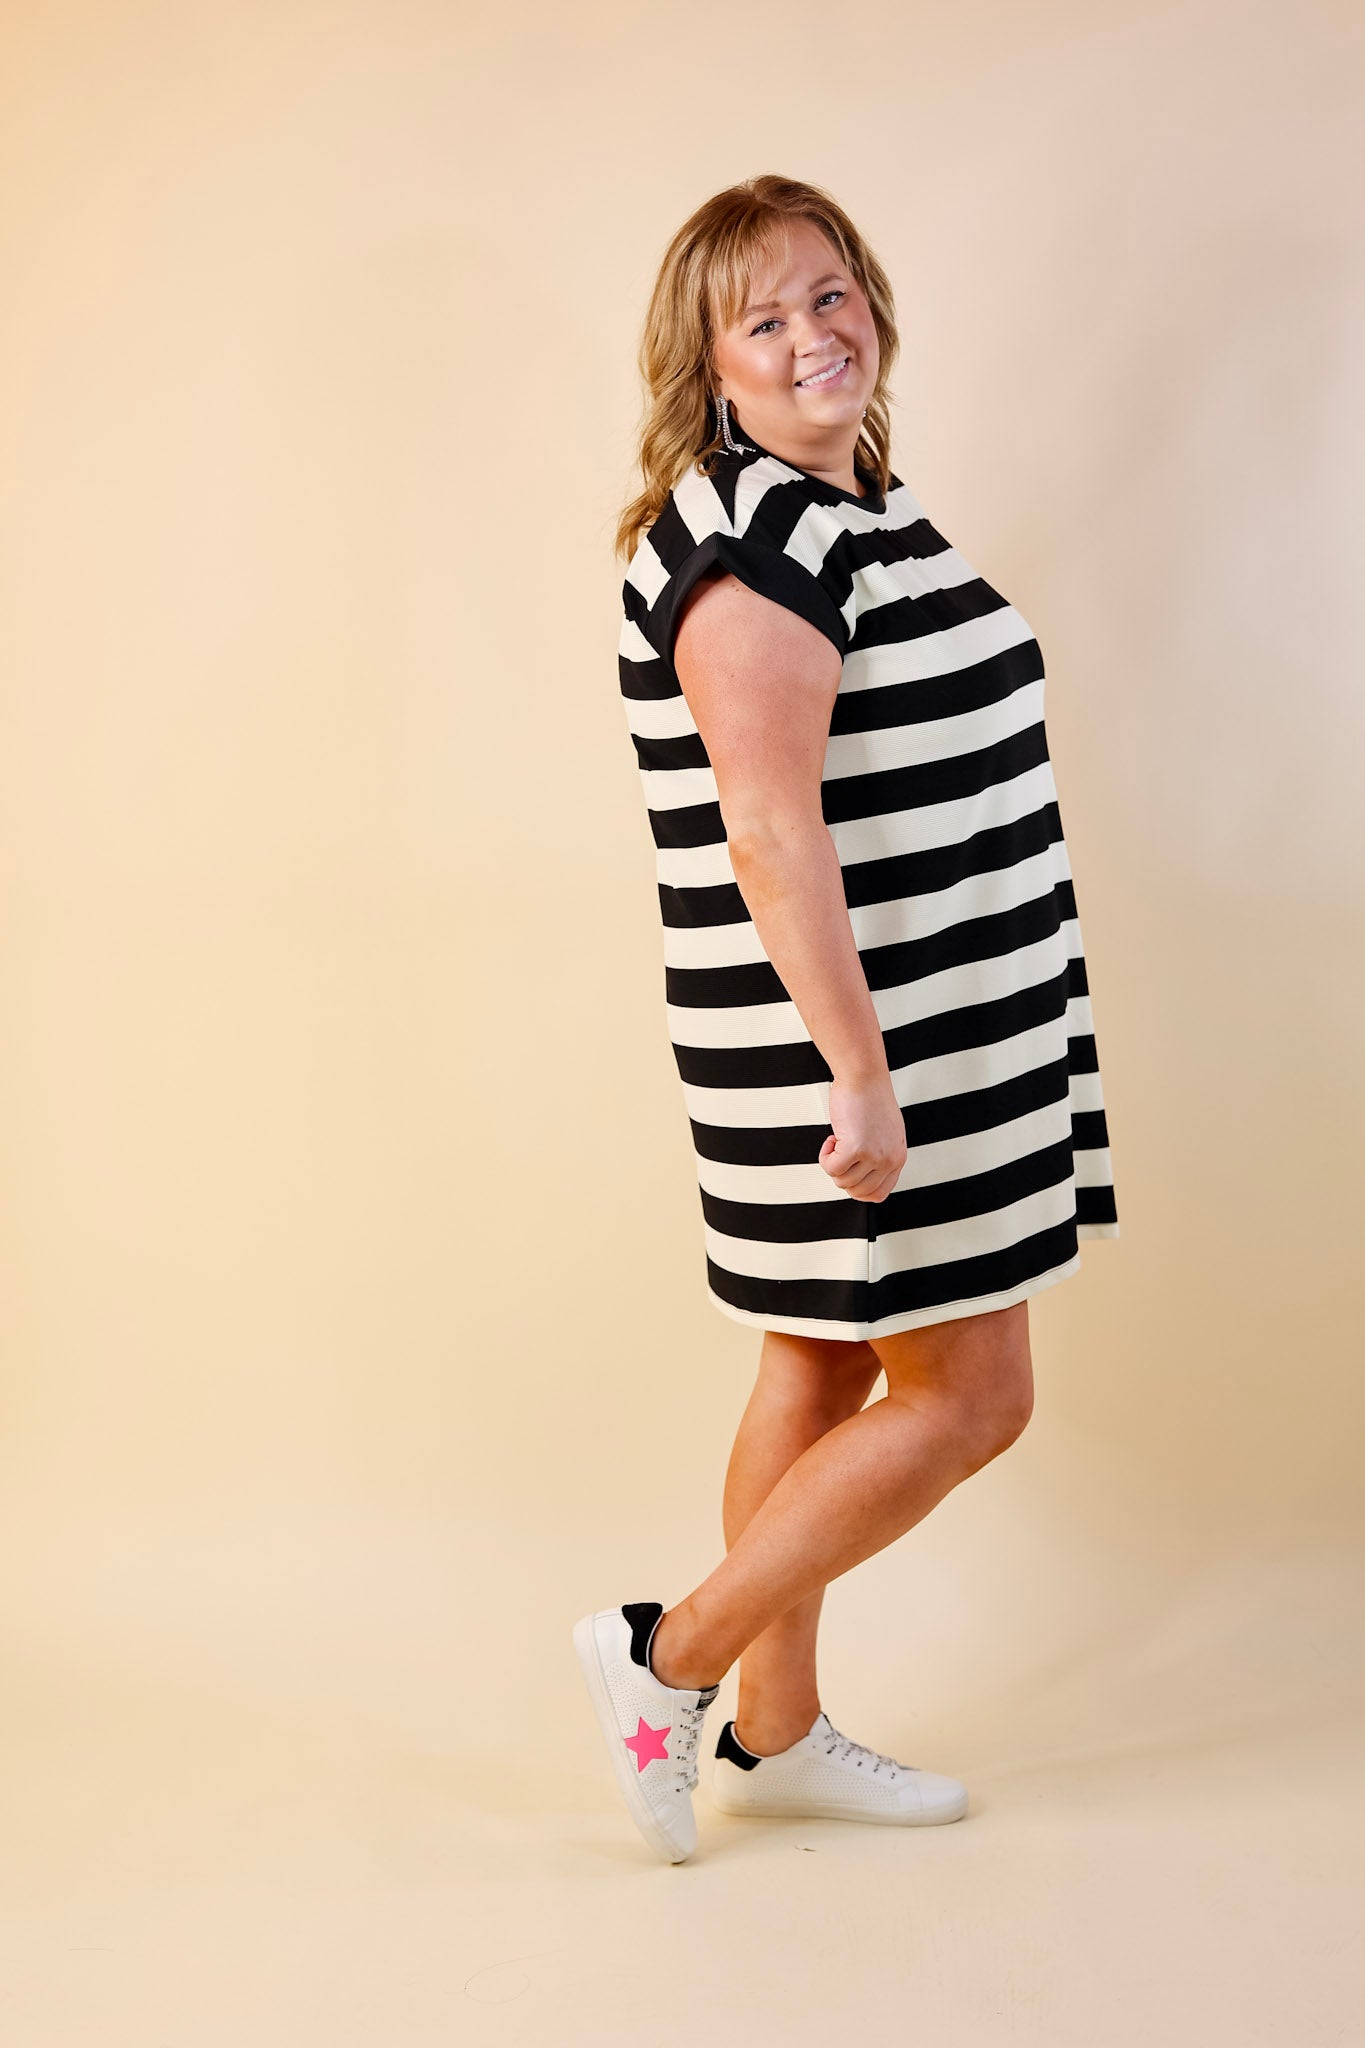 Stripe it Simple Striped Dress with Cap Sleeves in Black and Cream - Giddy Up Glamour Boutique